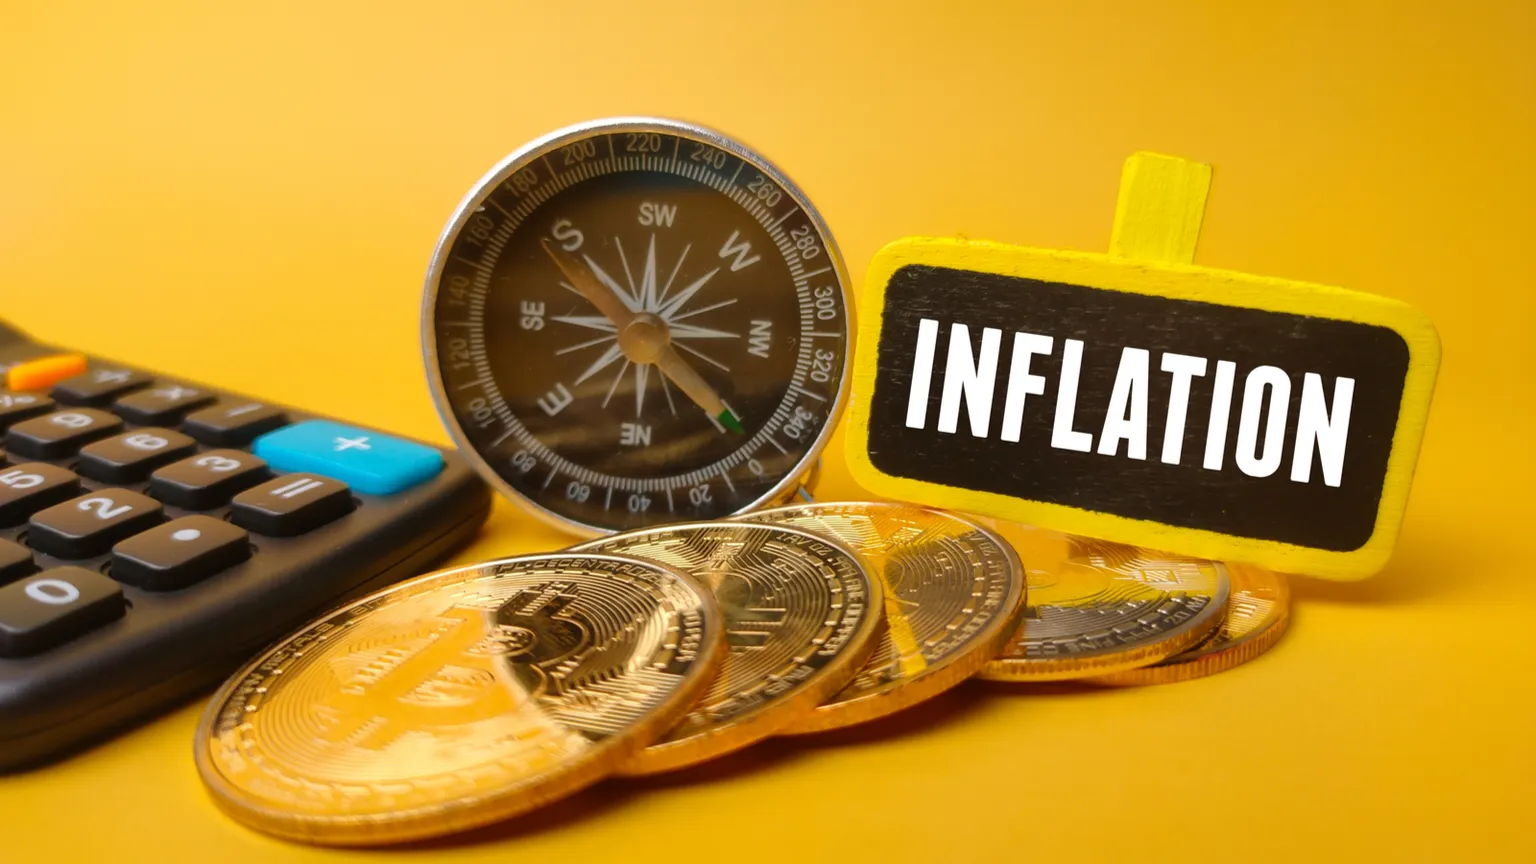 Many have argued that Bitcoin is an inflation hedge. Image: Shutterstock.